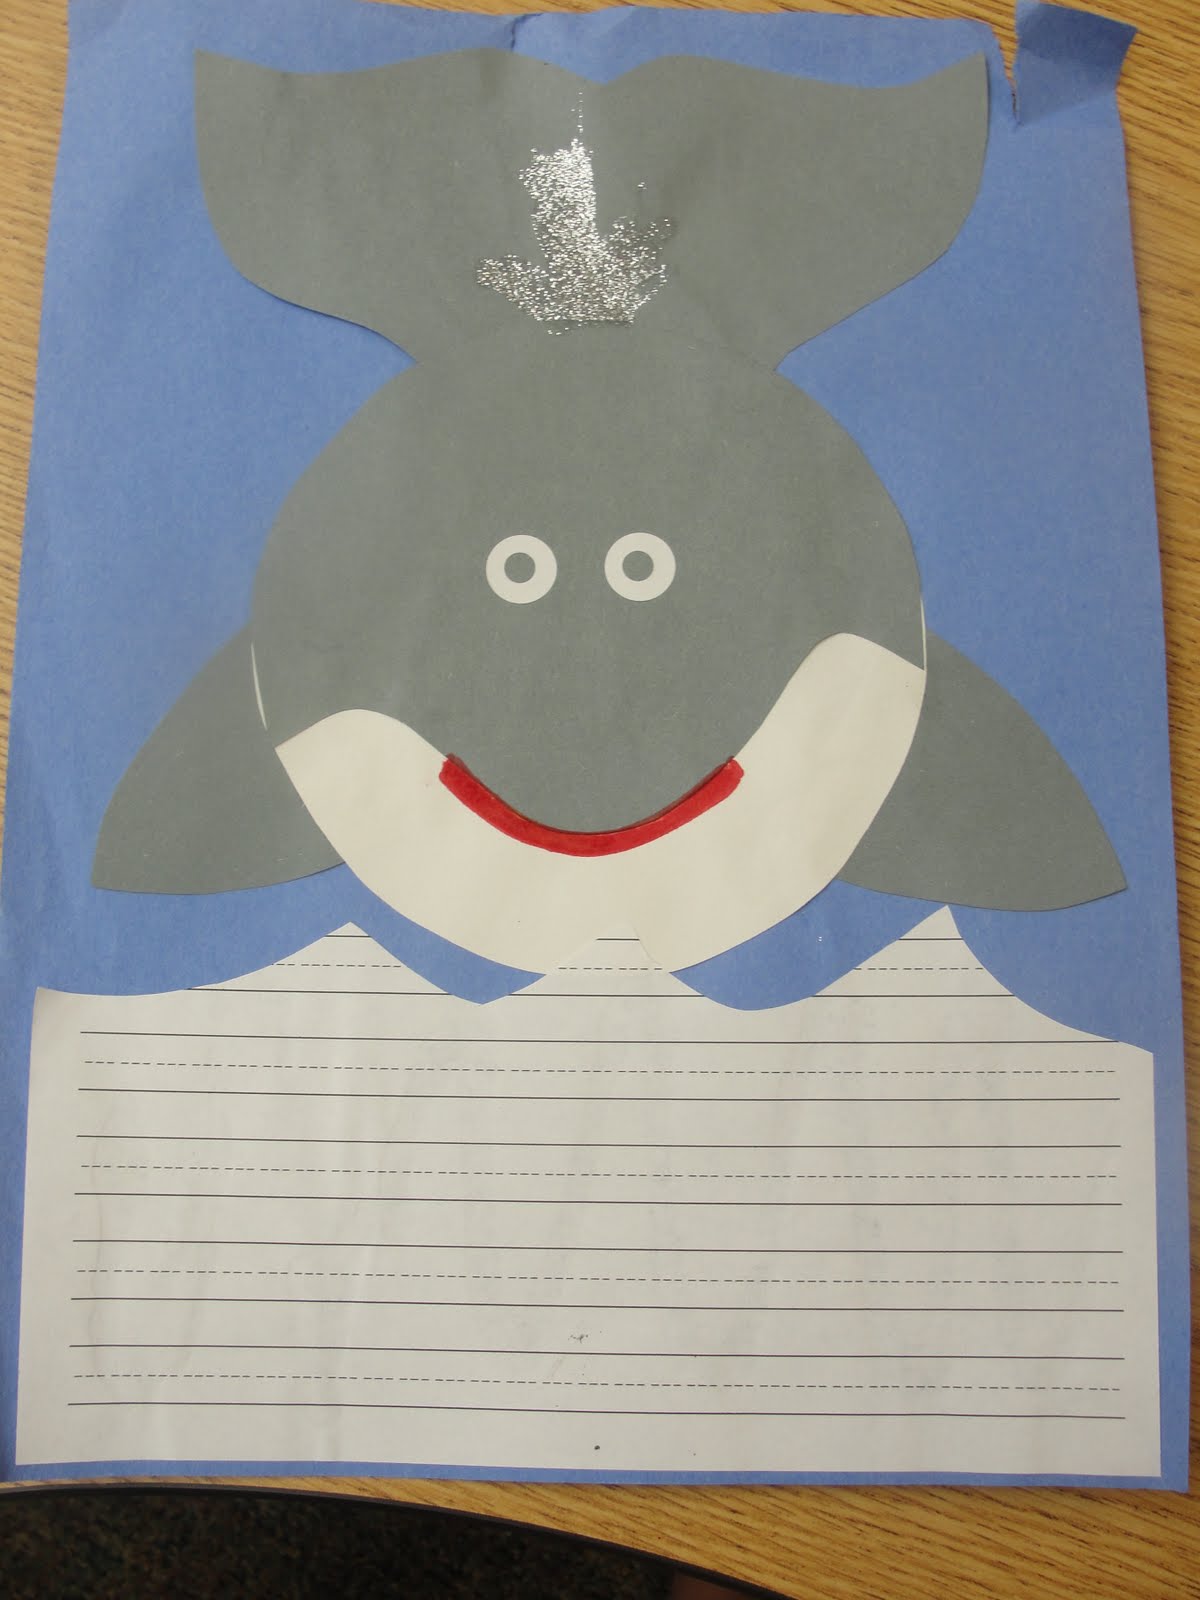 Creative Writing For 2nd Grade Free Writing Worksheets For 2nd Grade Students